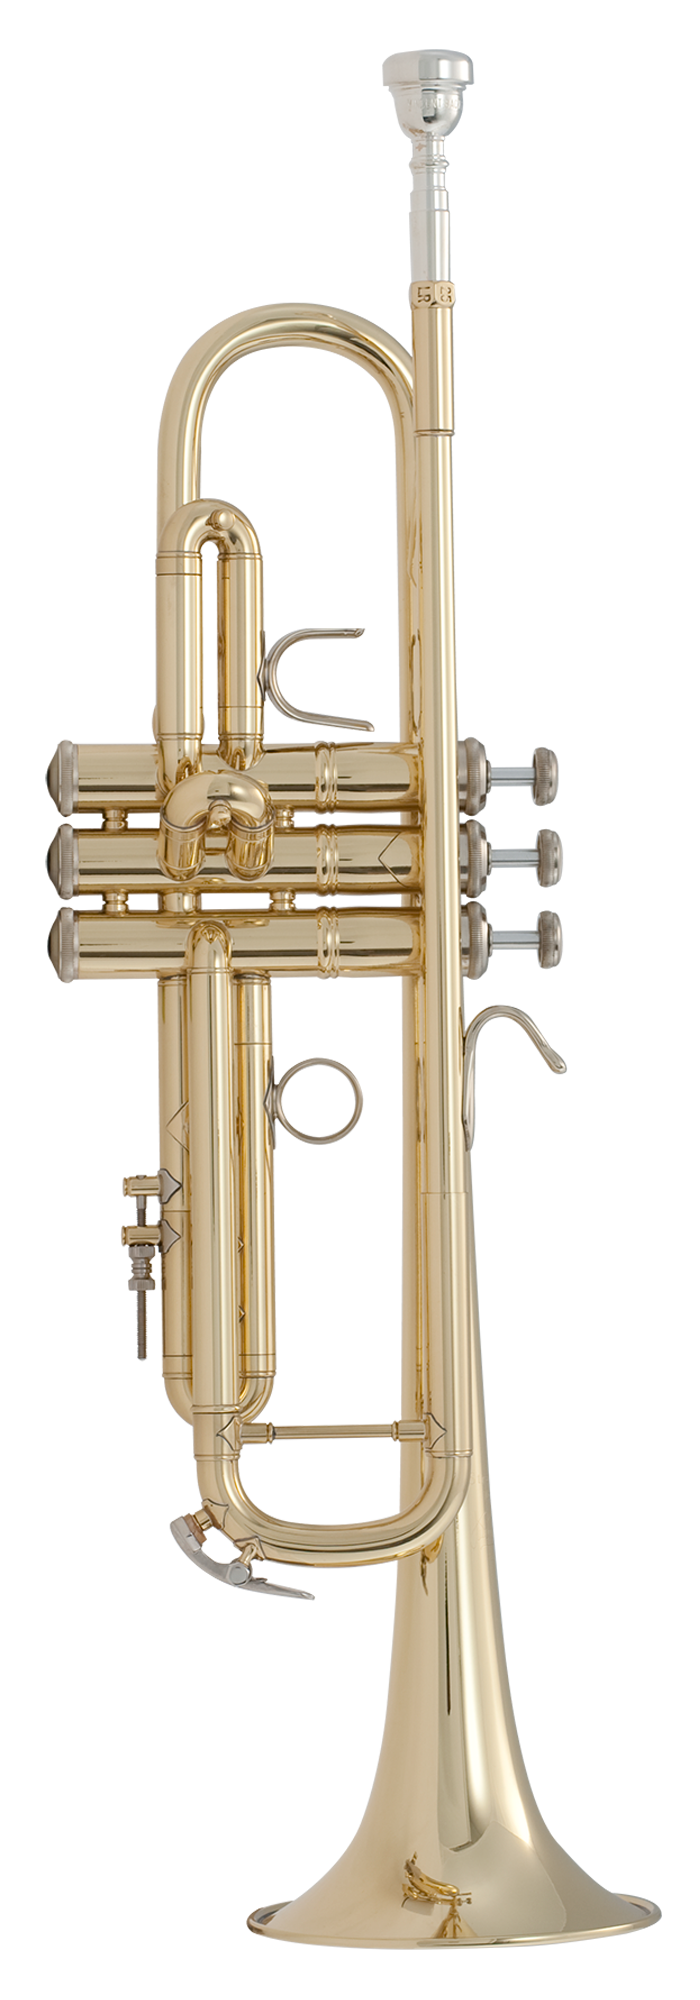 Bach LR18037 Bb Trumpet - Professional, 37 Bell, Lacquer Finish